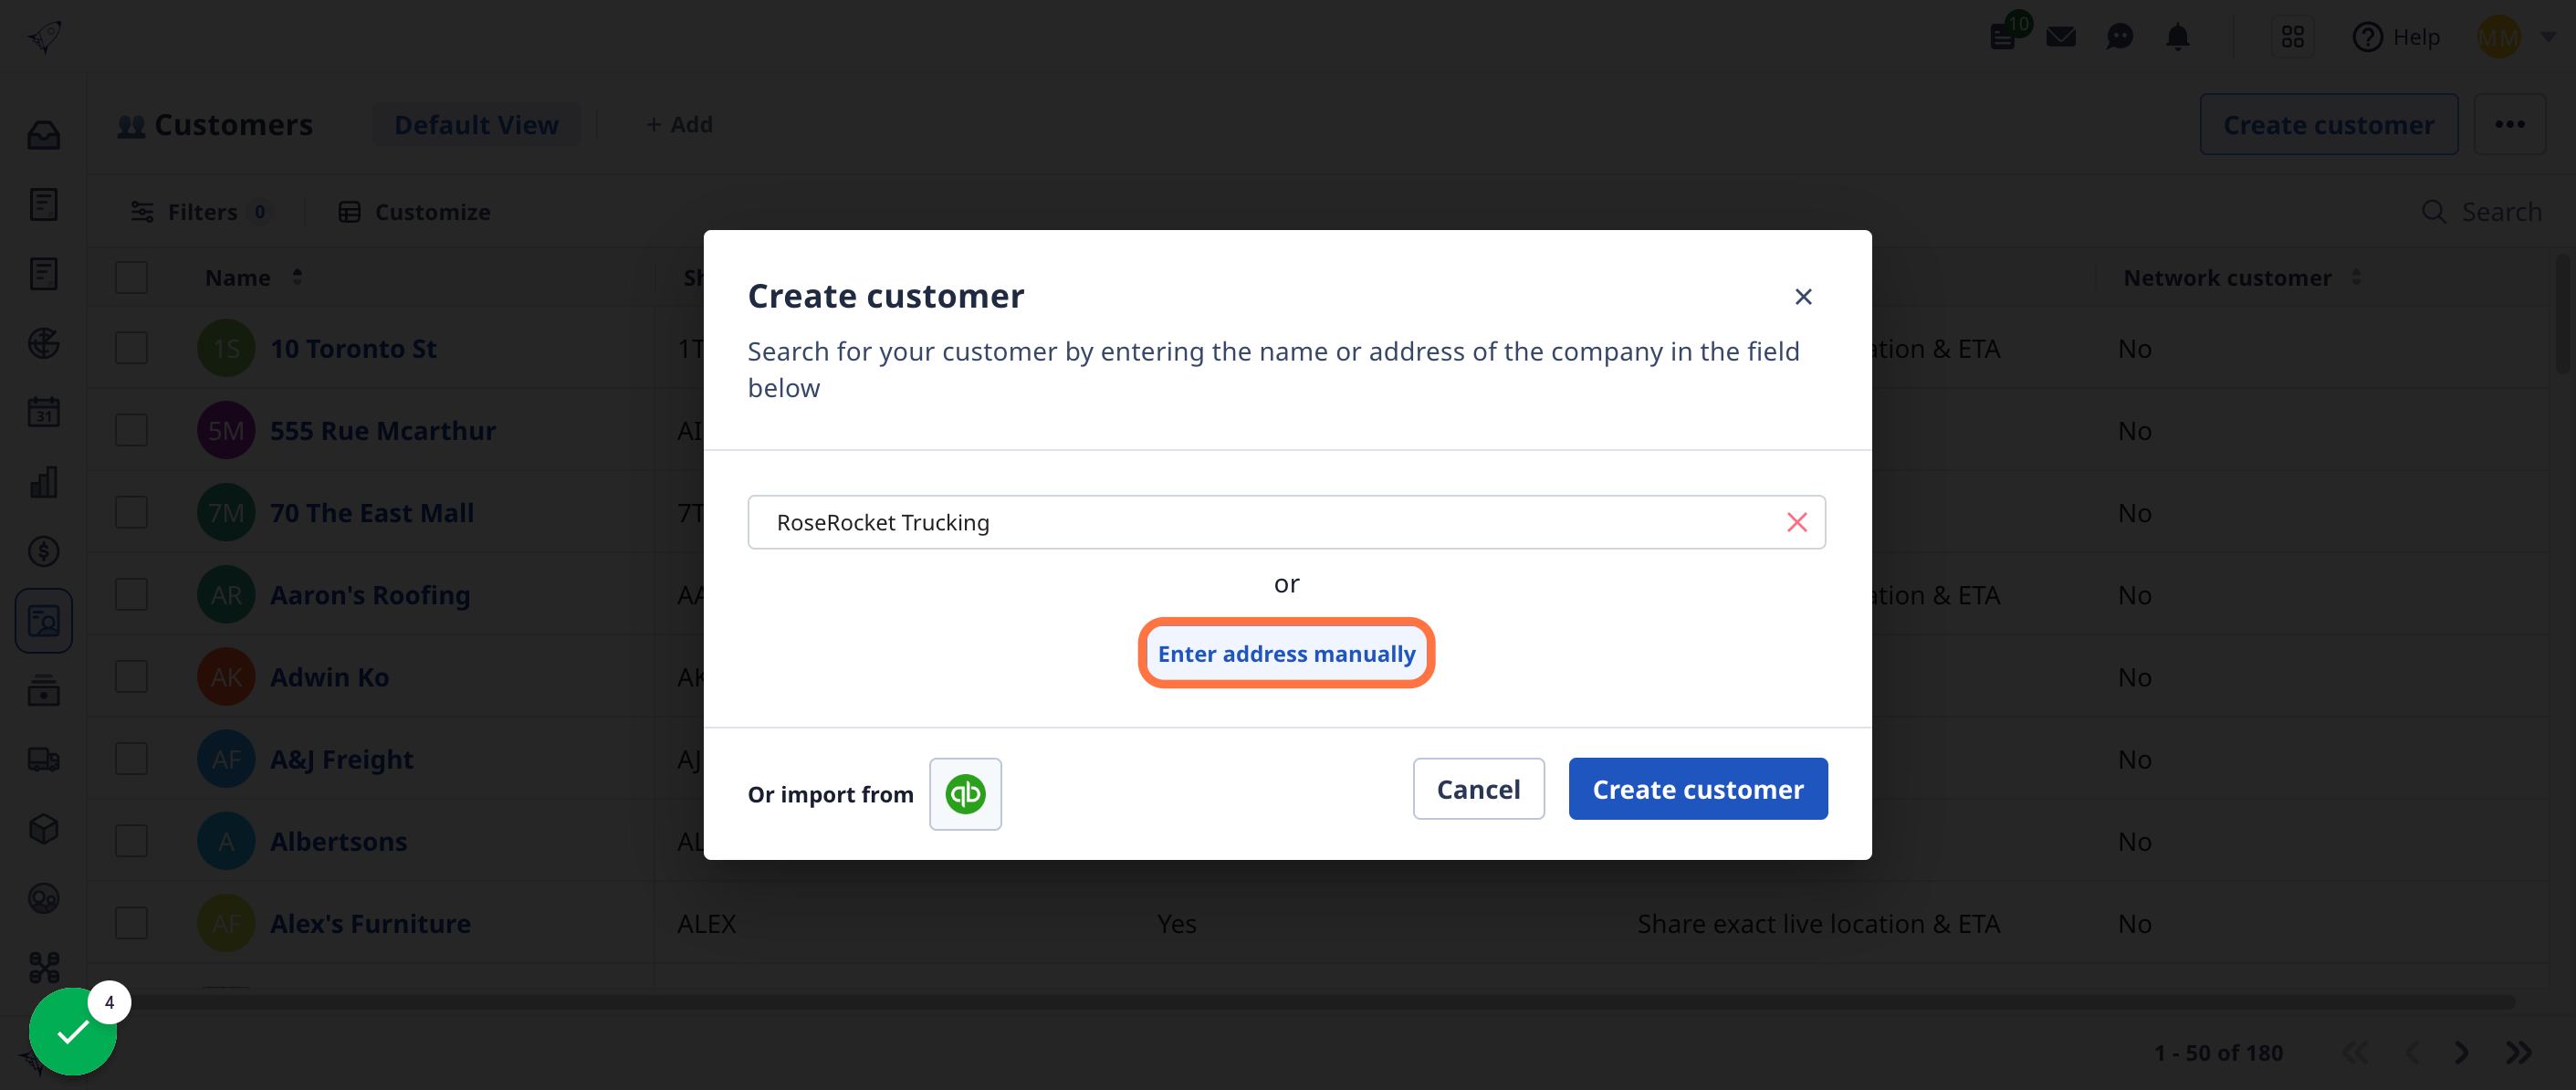 You can also choose to 'Enter address manually' to create the customer